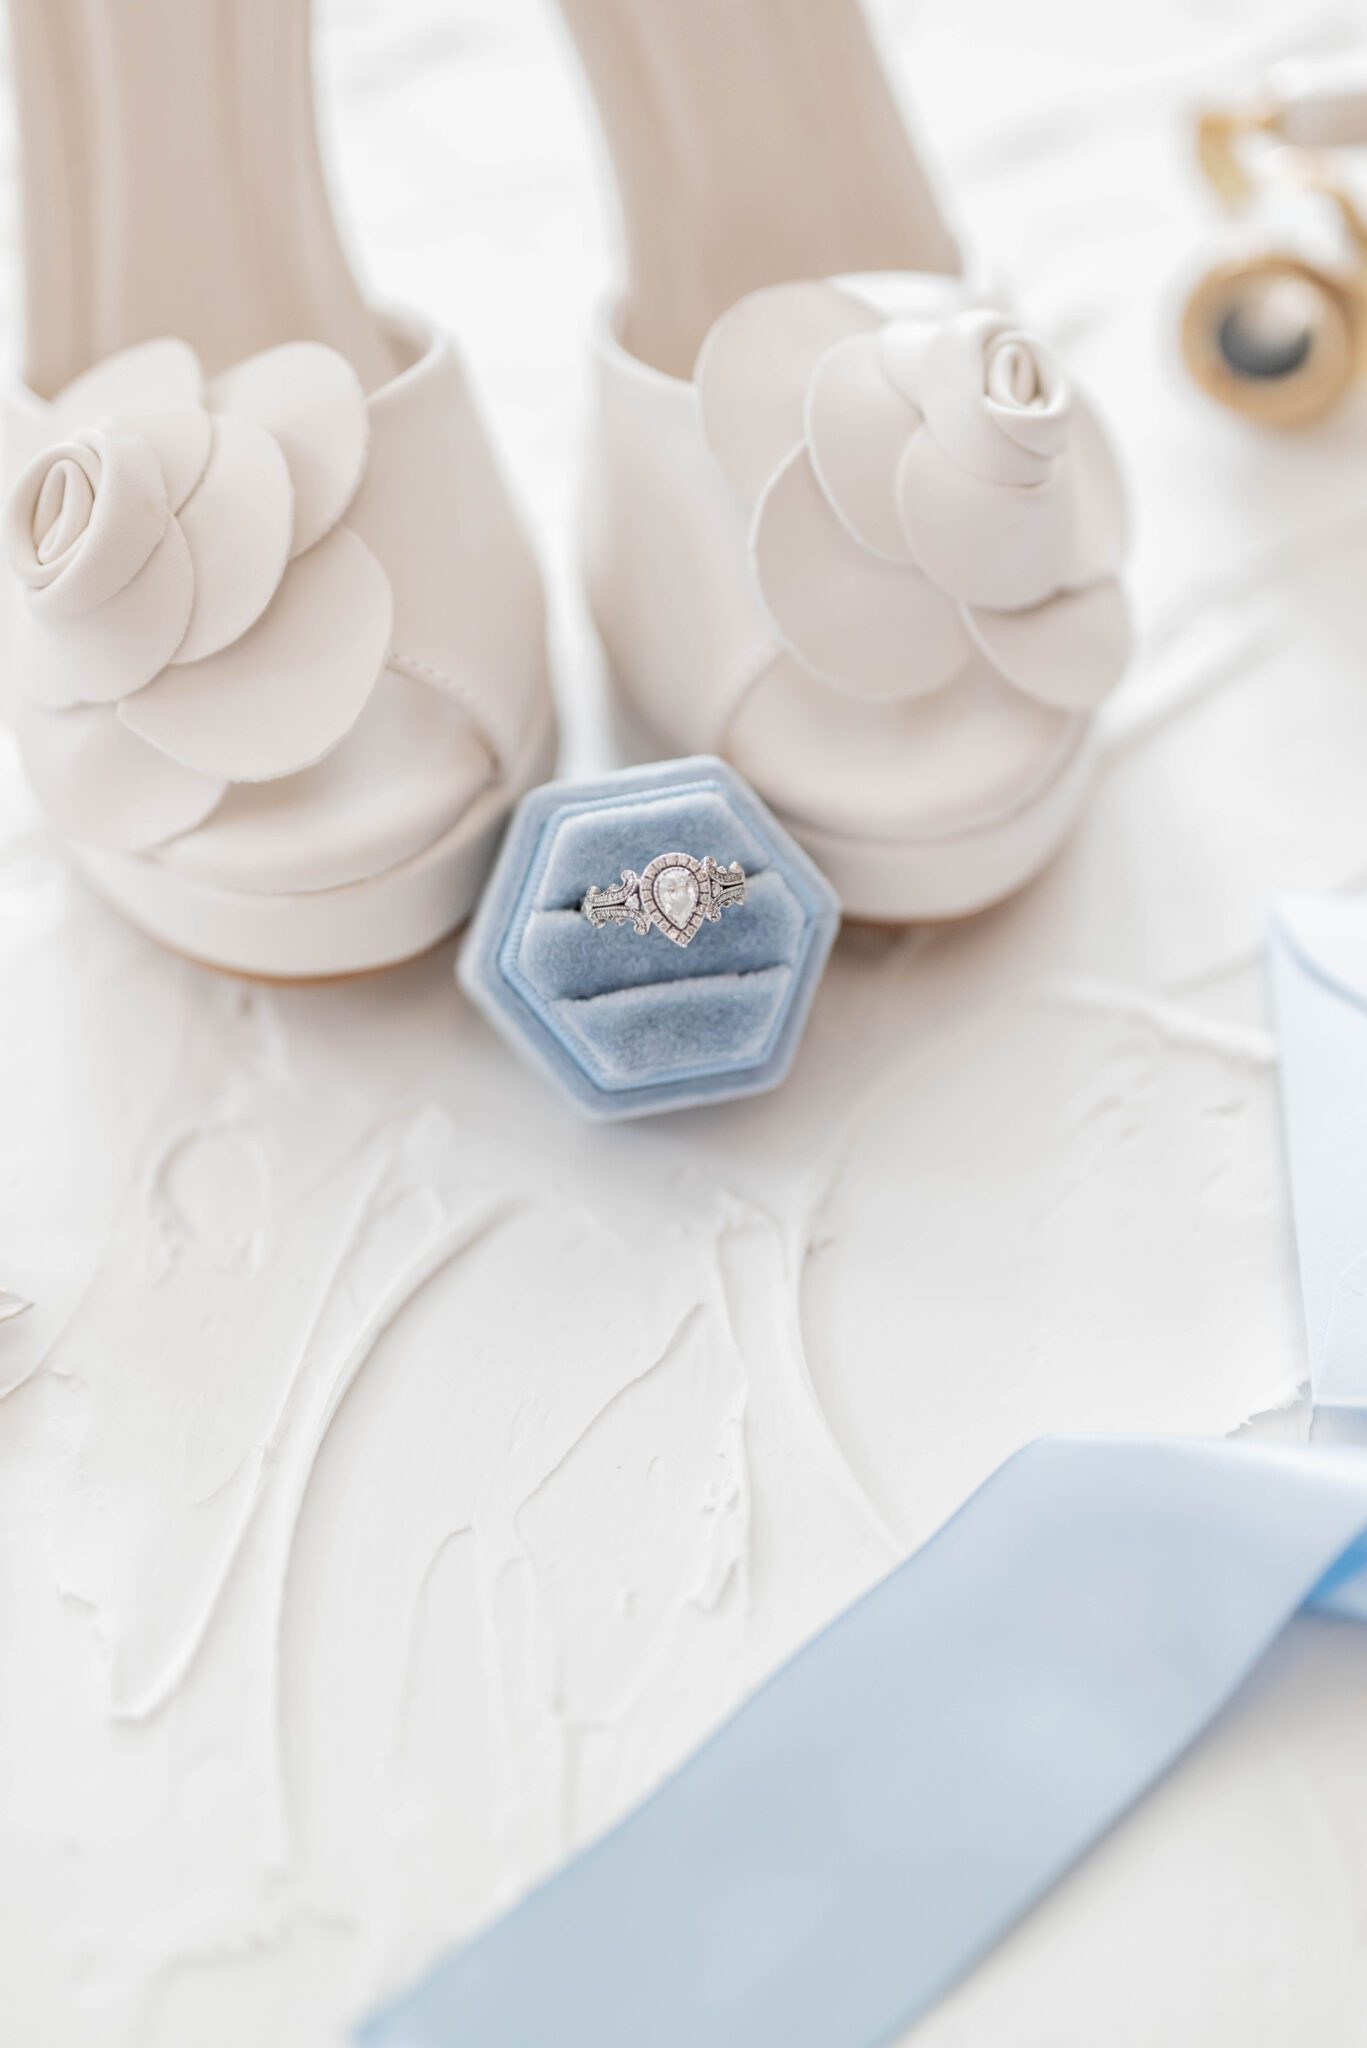 Flat lay photo of baby blue velvet ring box with pear shaped engagement ring, white leather bridal heels with large white flower on the toe, baby blue ribbon detail on a white plaster table top